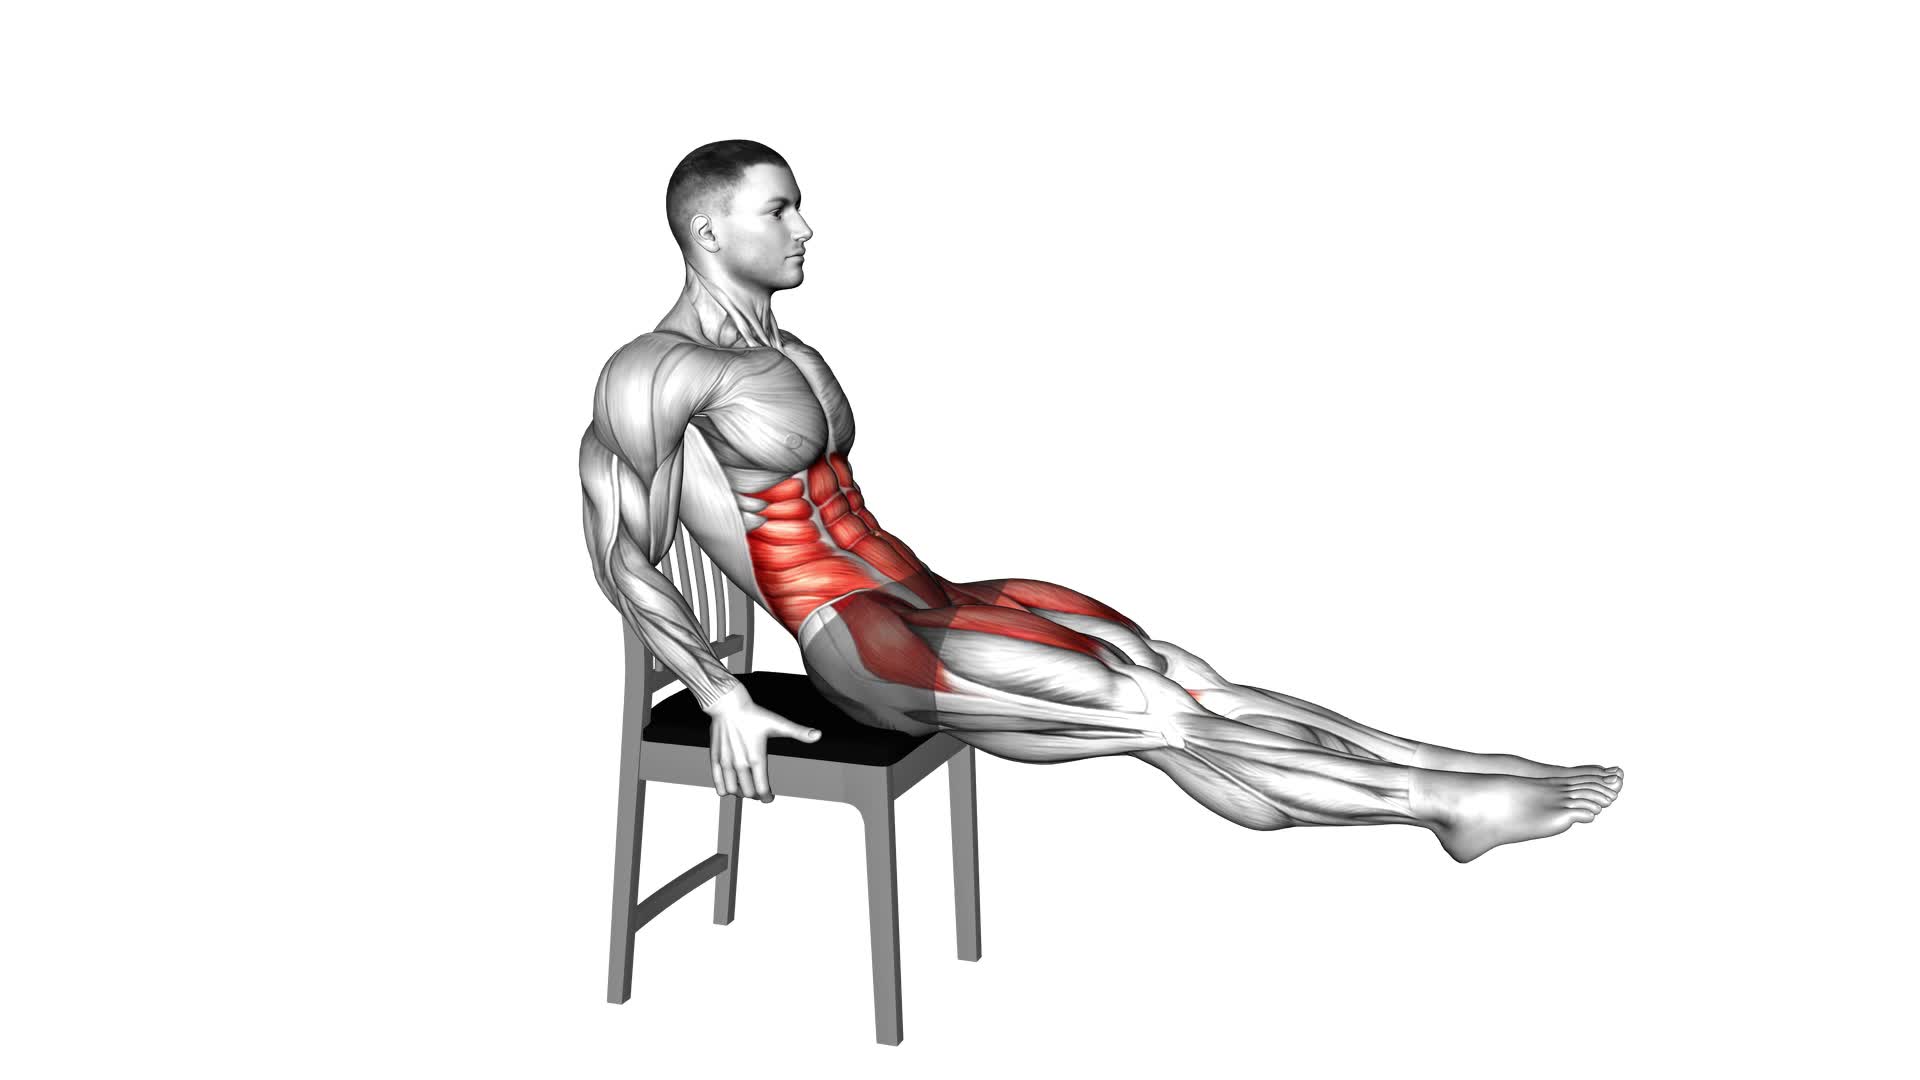 Sitting in Out Leg Raise With Chair - Video Exercise Guide & Tips